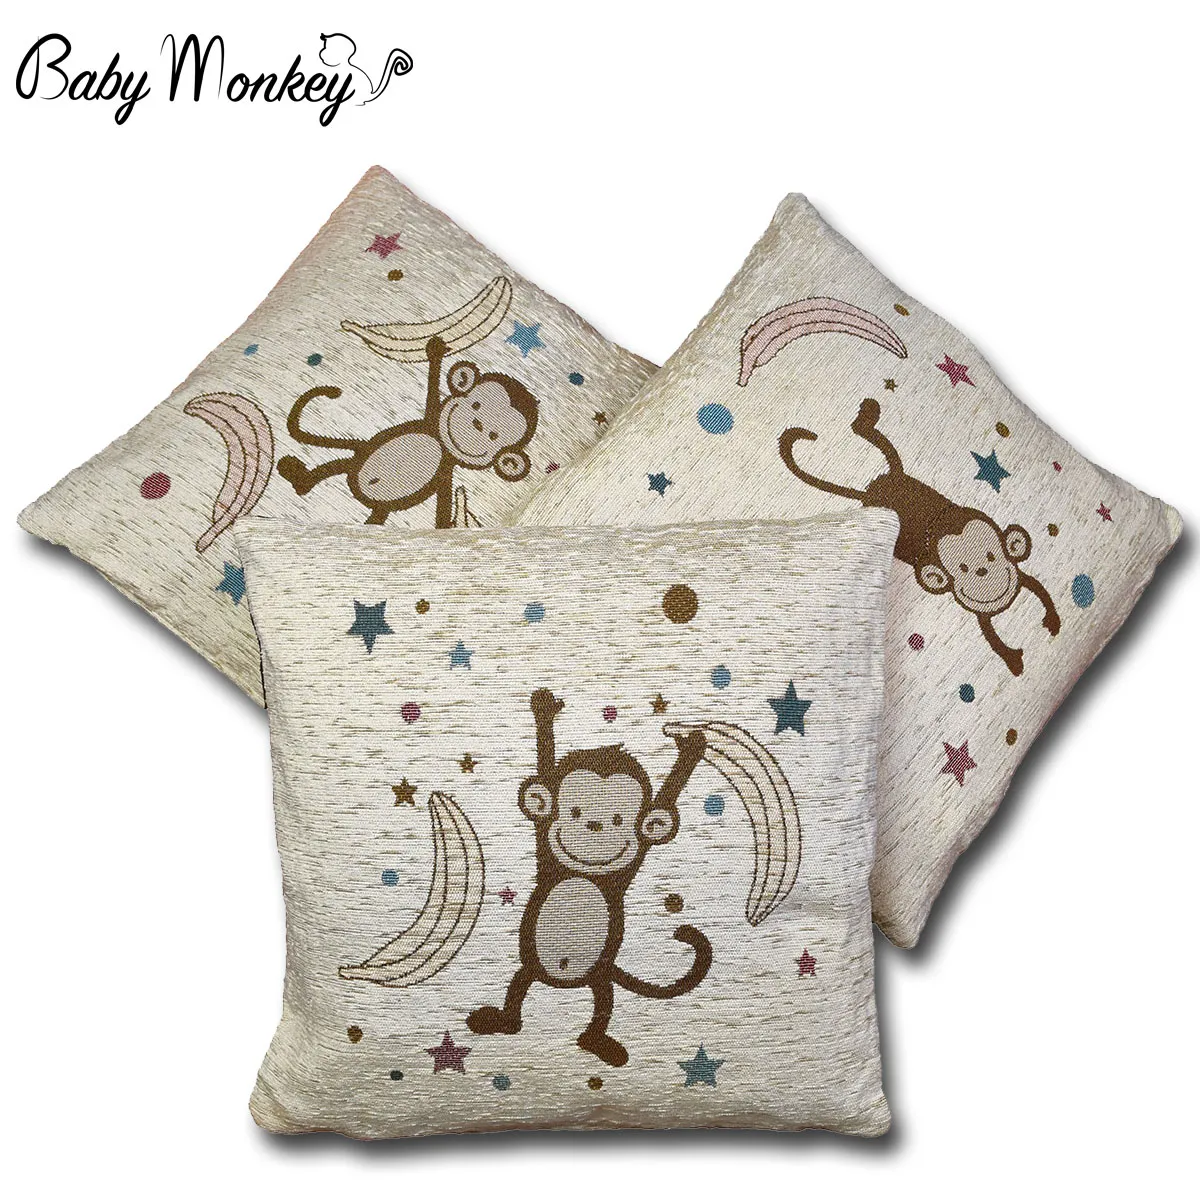 Little Monkey - Trio of Cushion Covers for children